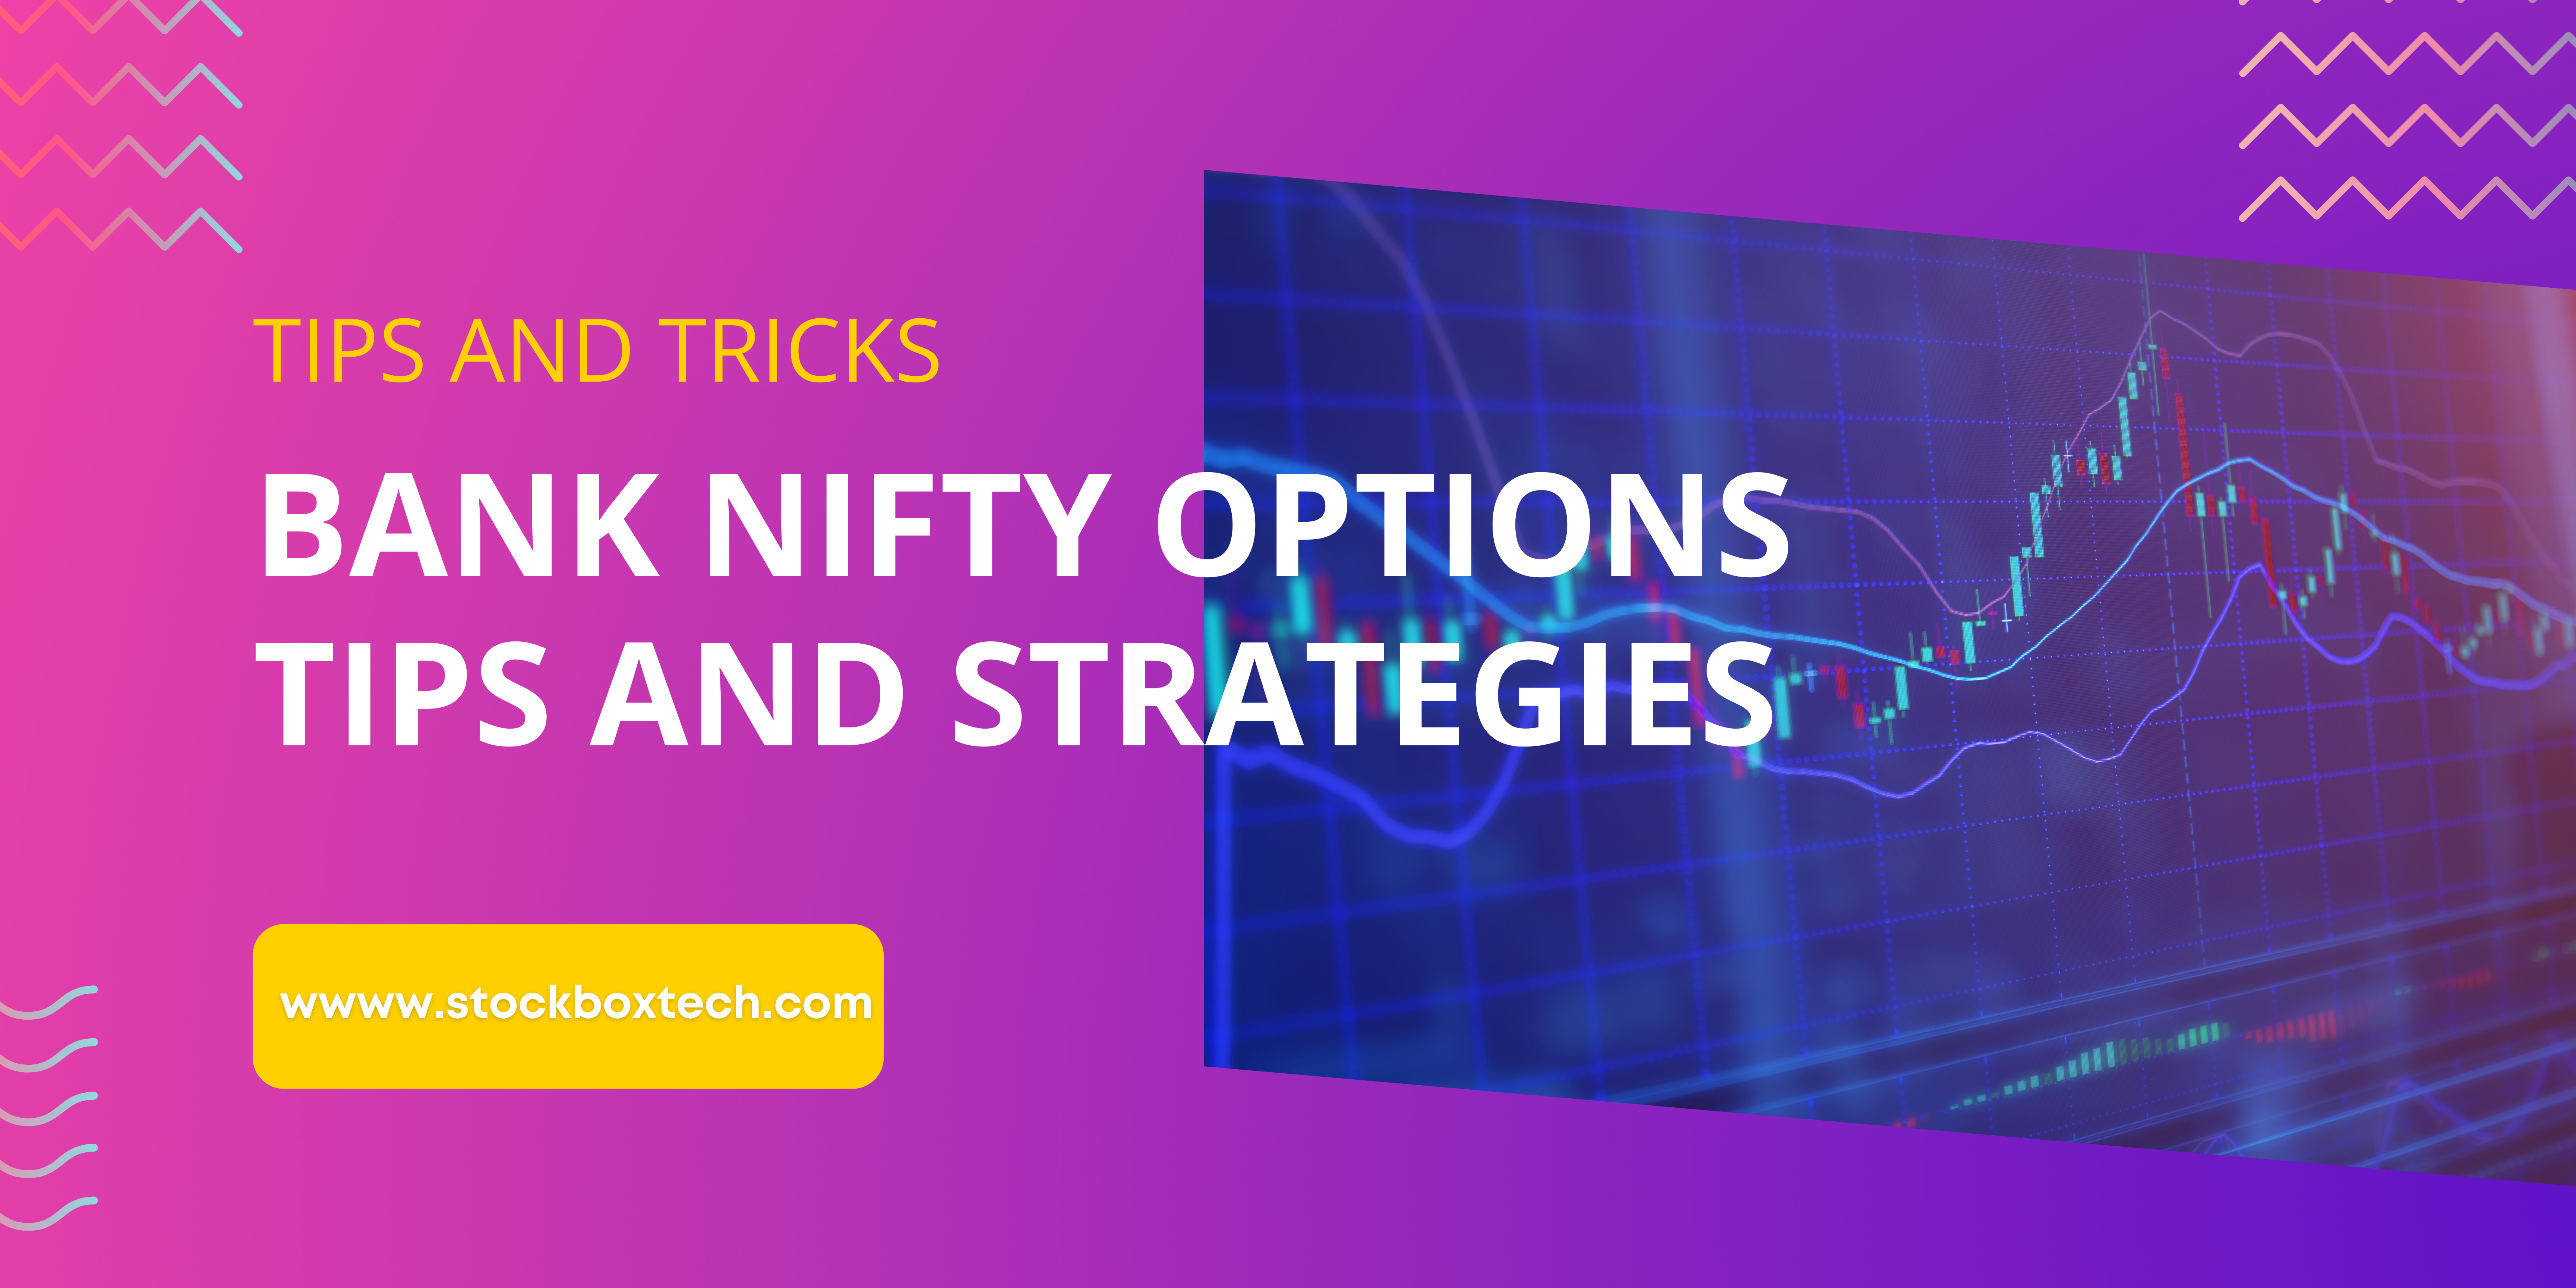 Bank Nifty Options Tips And Strategy